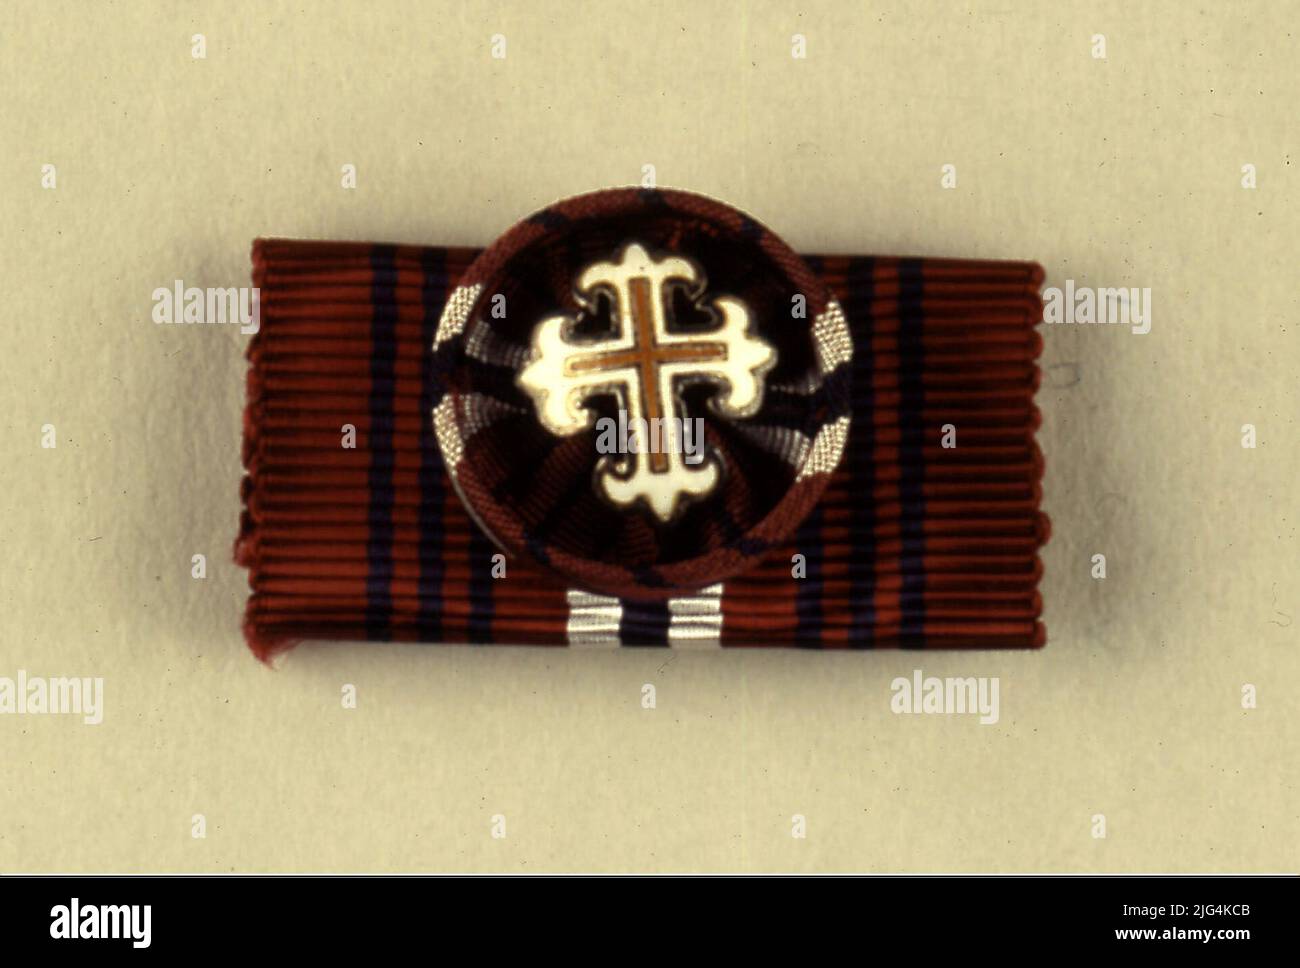 Diario de la Cruz del Mérito Military, Cross of 1st Class, Portugal. Military Medal. Diario de la Cruz del Mérito Military, Cross of 1st Class. Badge used in the newspaper uniform foster by a horizontal tape with the colors of the order of Portuguese military merit (crimson red, with three thin stripes in a white, white and white transverse strips). Attached to the tape, a button is overlap with the cross of the order (Latin cross with unequal arms whose ends end in the form of lis flowers) .Serie: foreign orders/ order of military merit: Méritomateria medal: overdied metal, moaré de Silk, ena Stock Photo